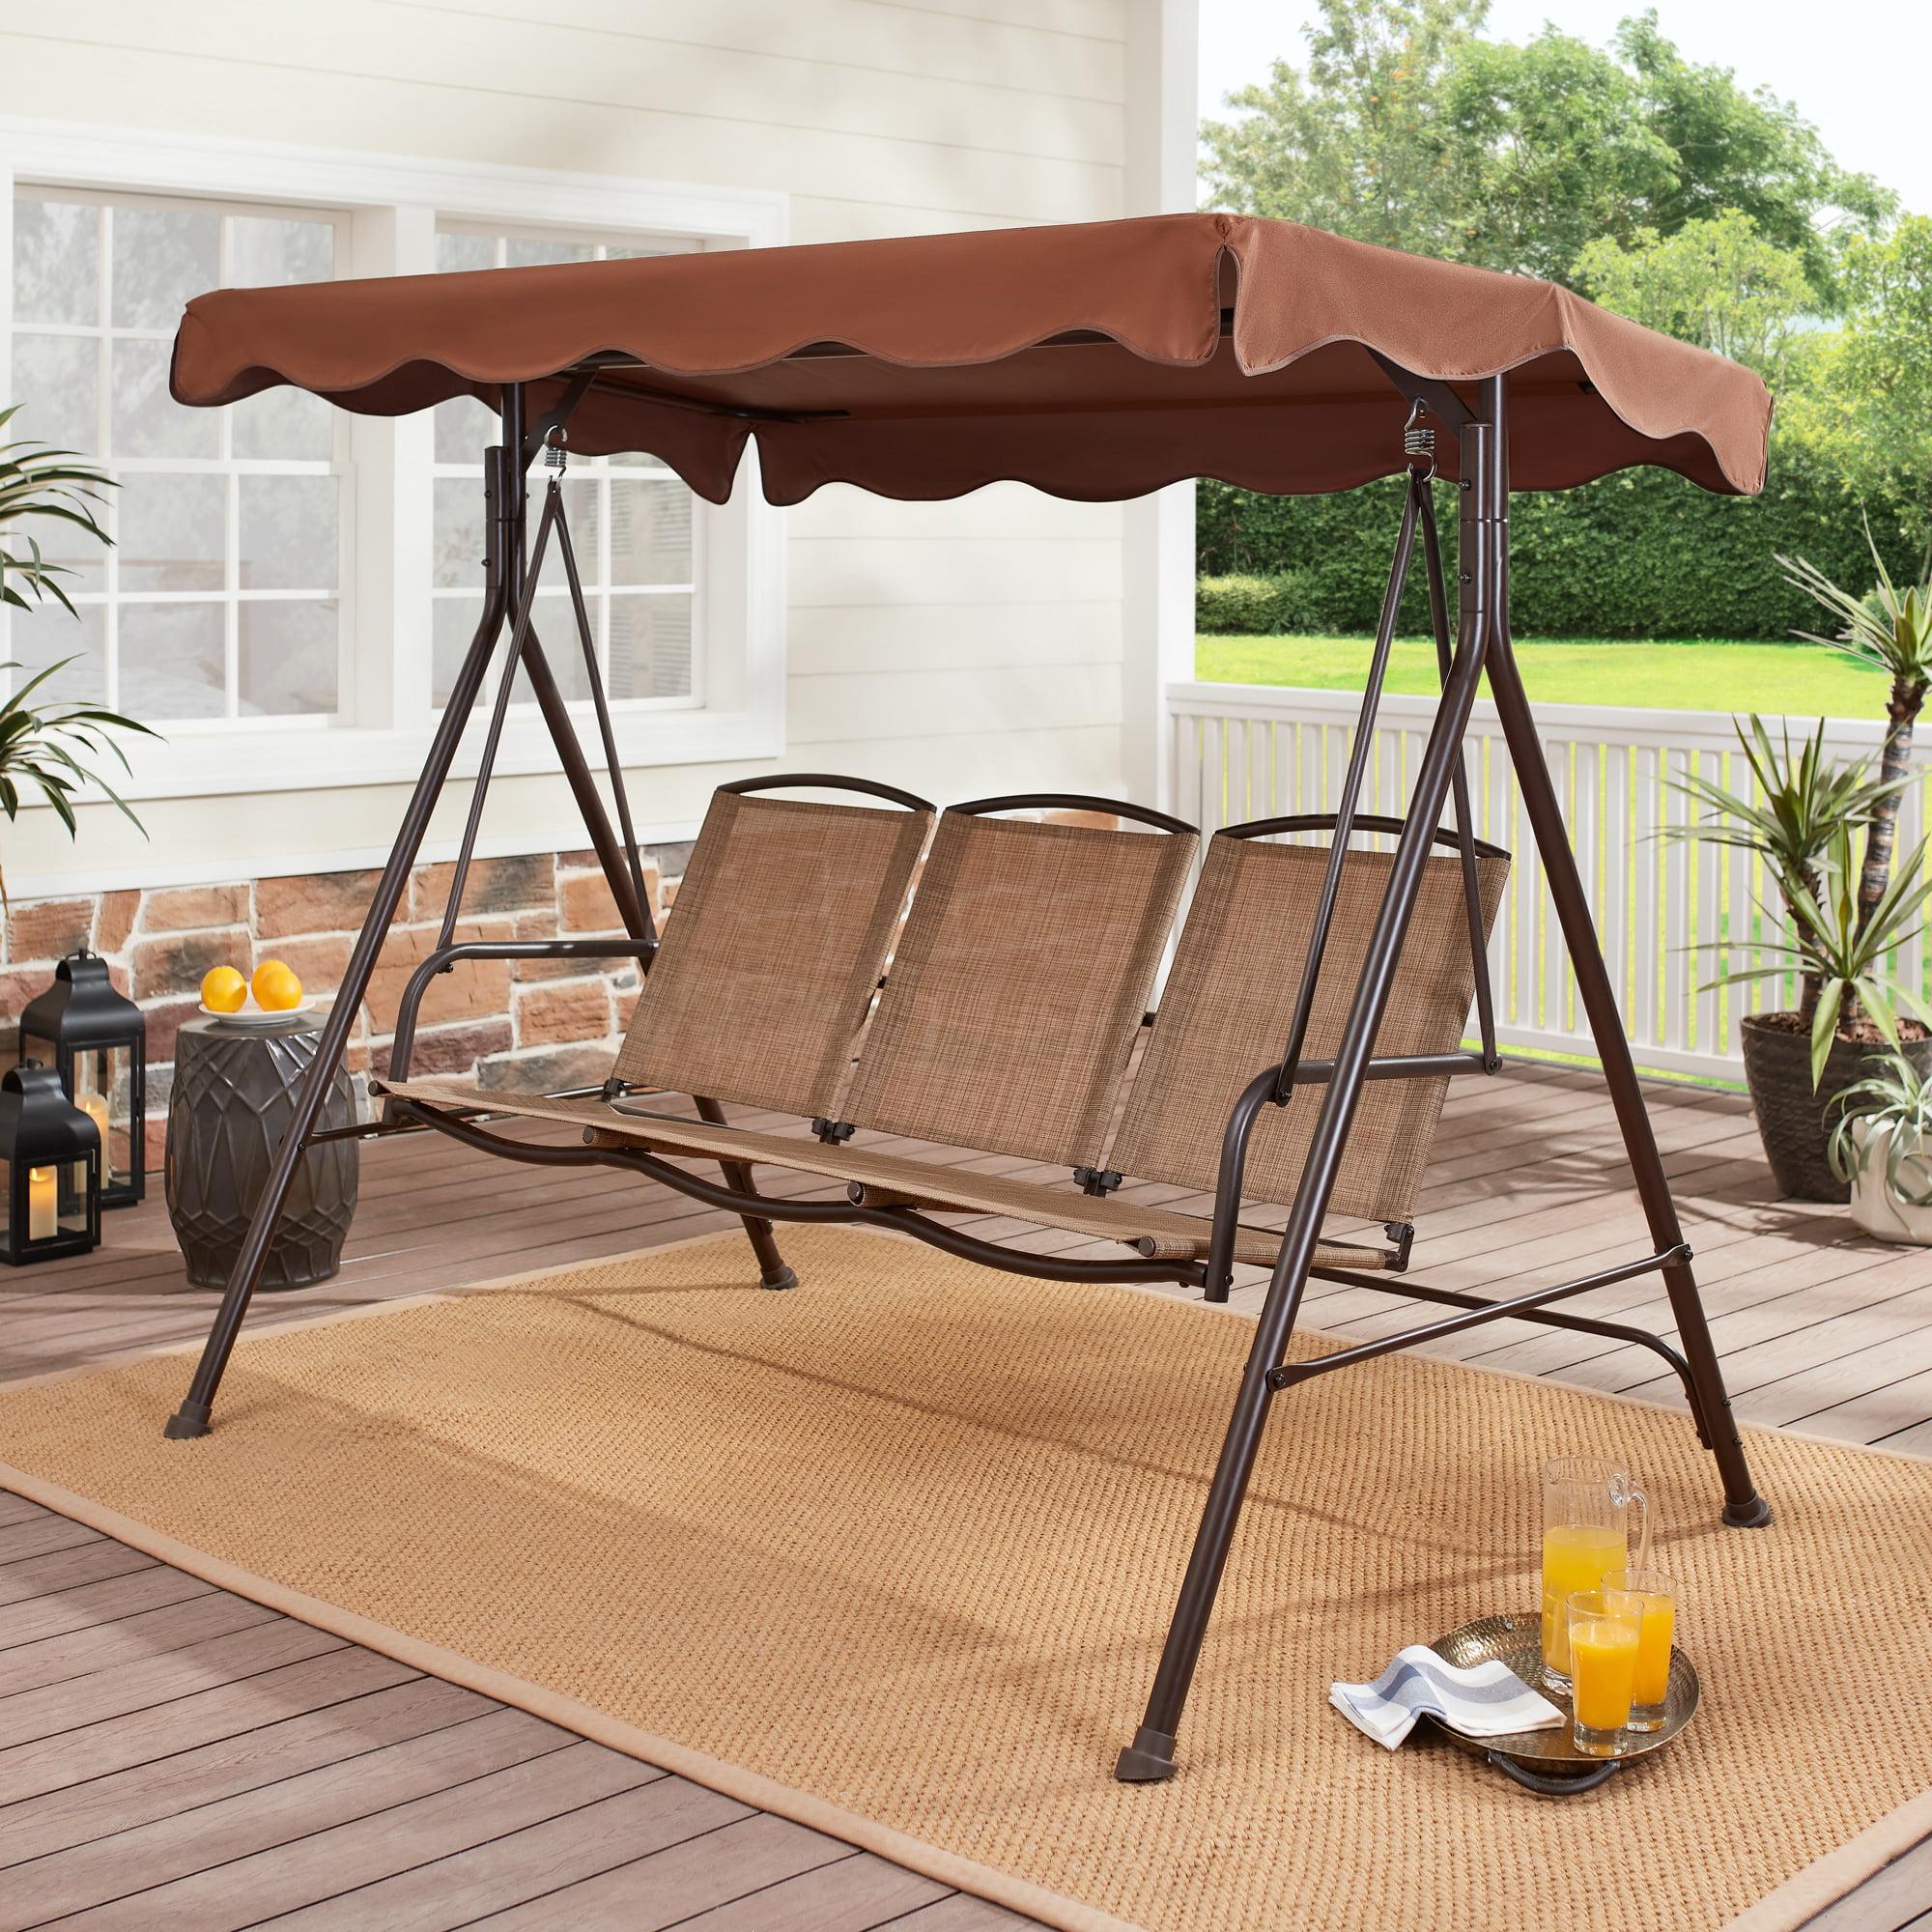 Mainstays Sand Dune Canopy Steel Porch Swing Brownblack 